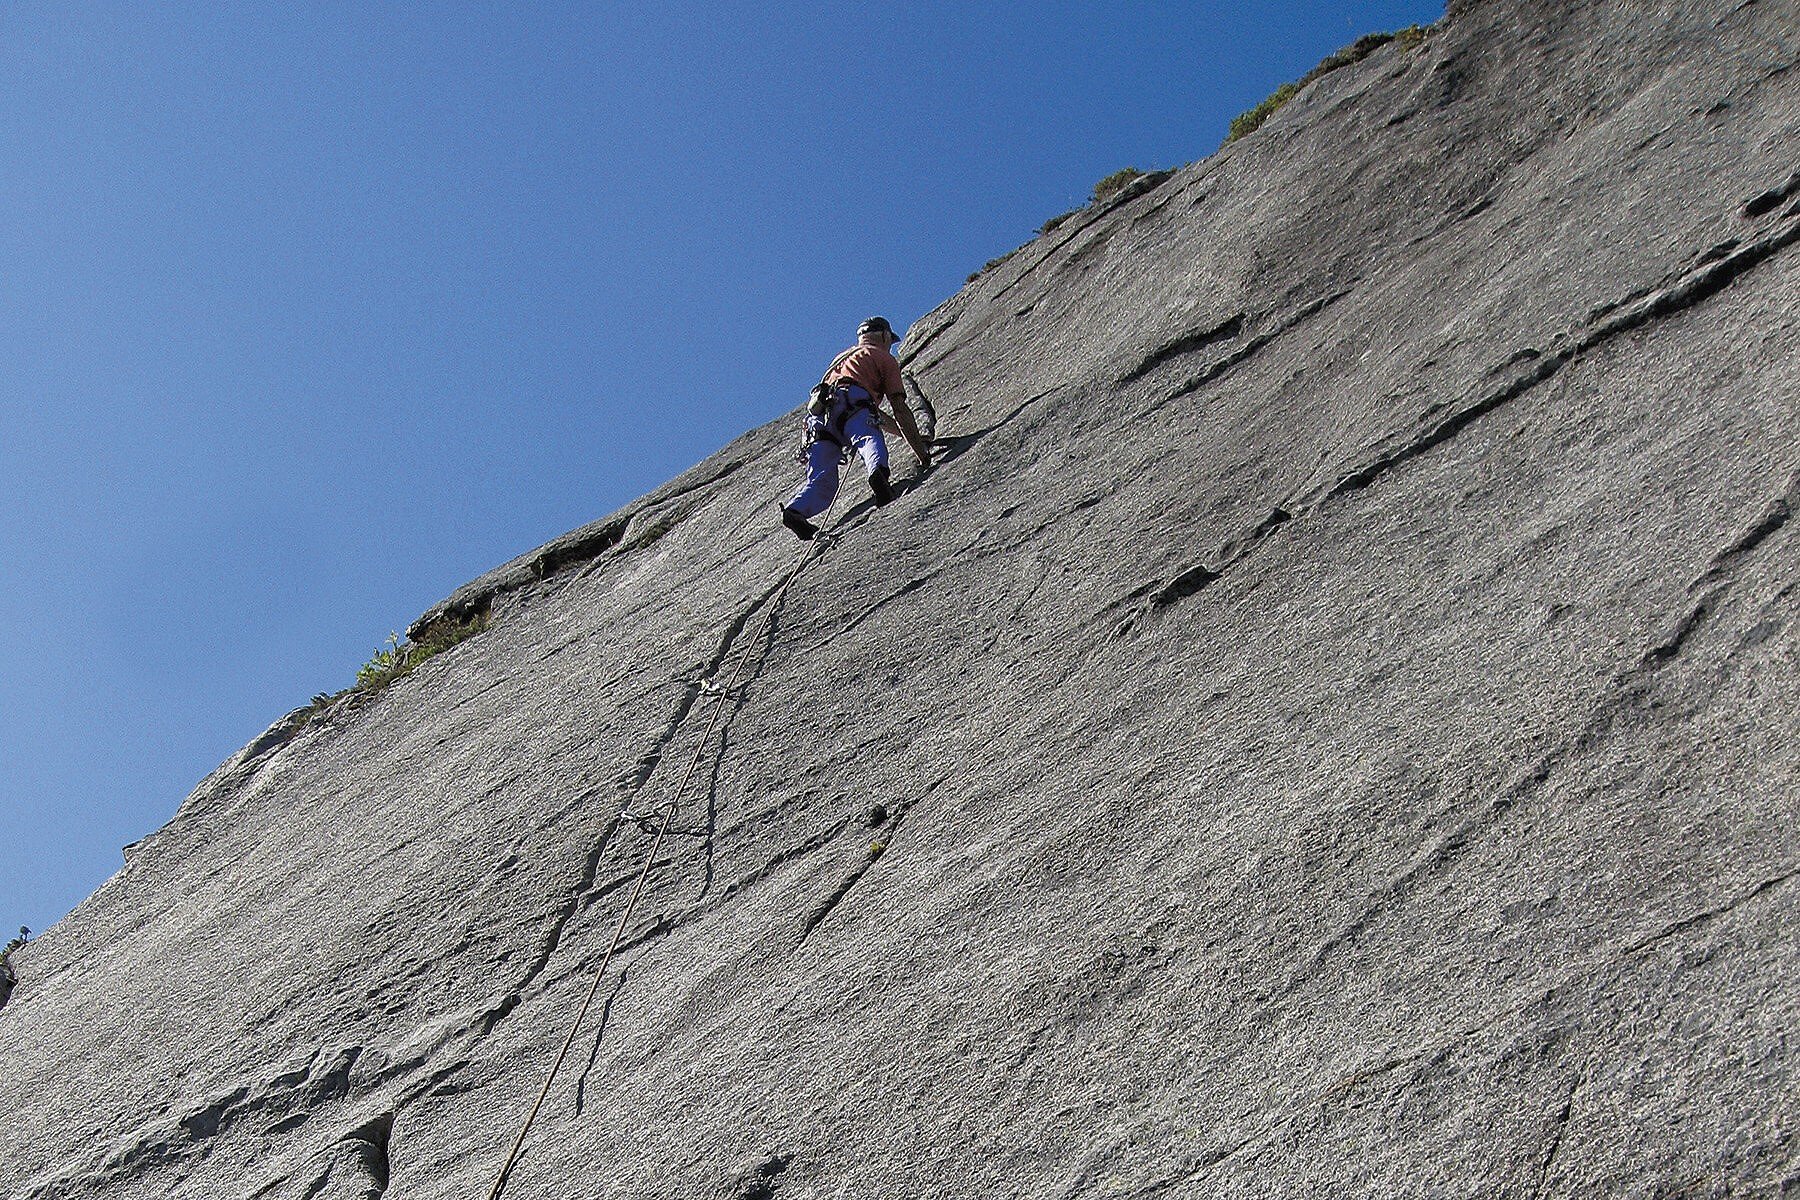 Colin Binks on the superb second pitch of Puffrisset (N6) Kallebukta  © Chris Craggs